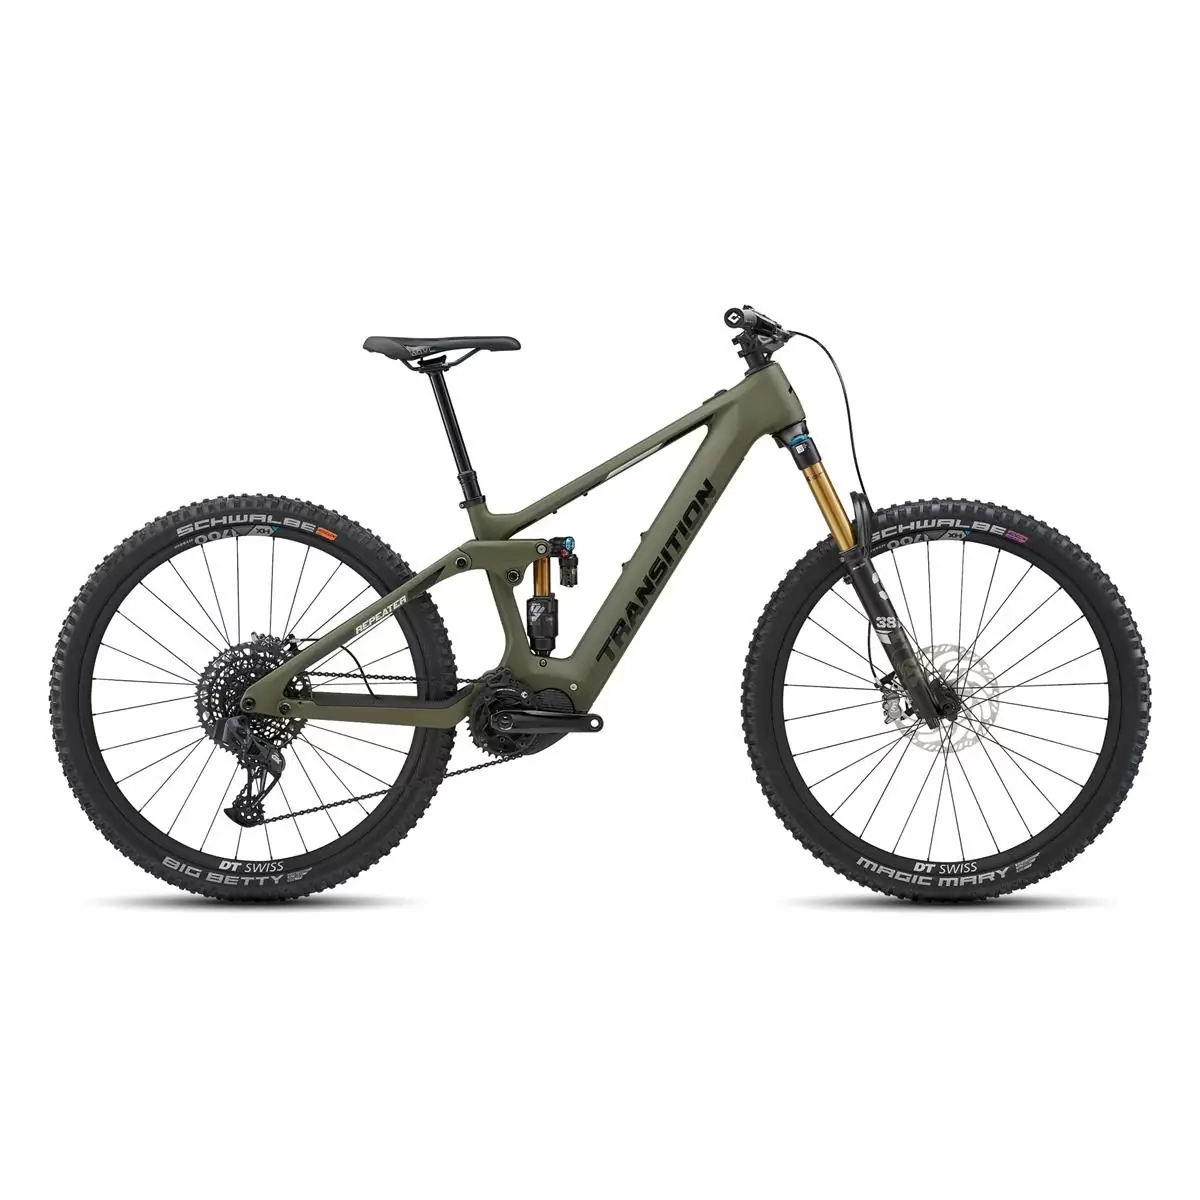 Repetidor Carbono AXS 29'' 160mm 12s 630Wh Shimano EP8 Mossy Green Talla L - image